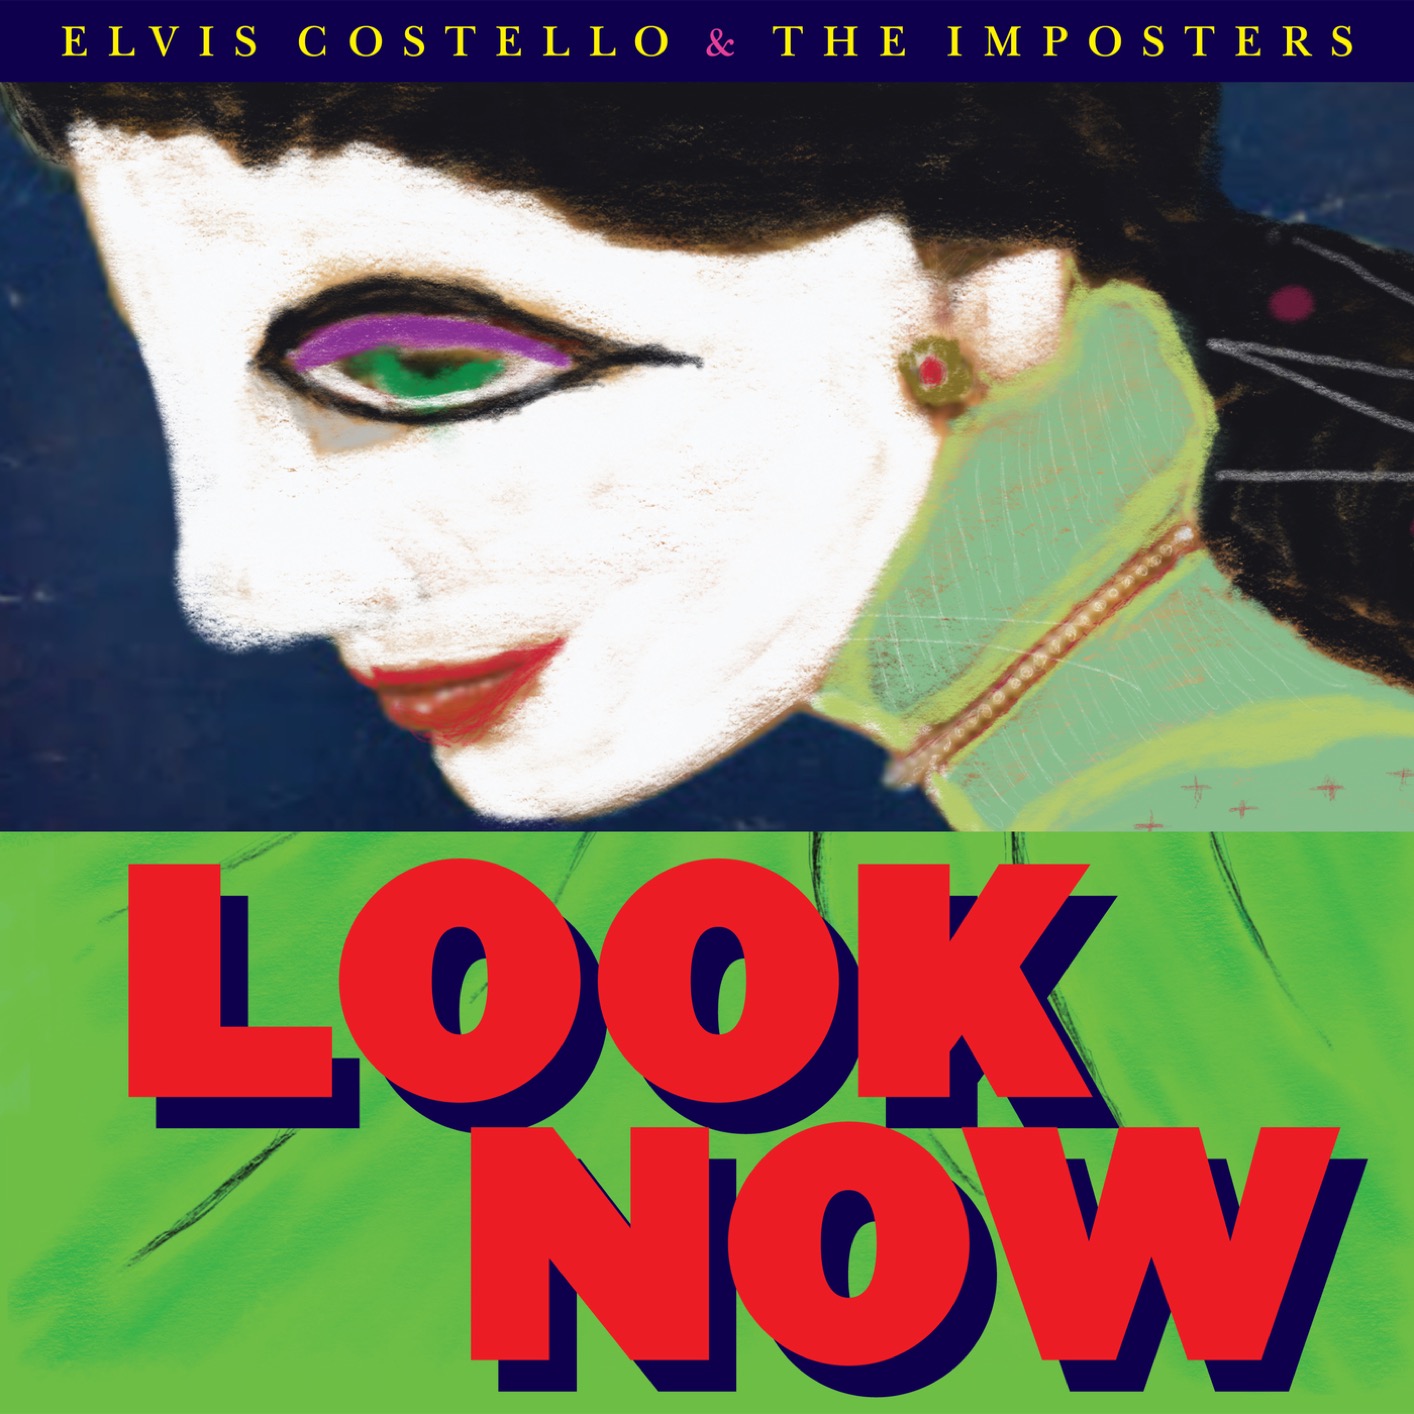 Elvis Costello & The Imposters - Look Now (Deluxe Edition) (2018) [FLAC 24bit/96kHz]